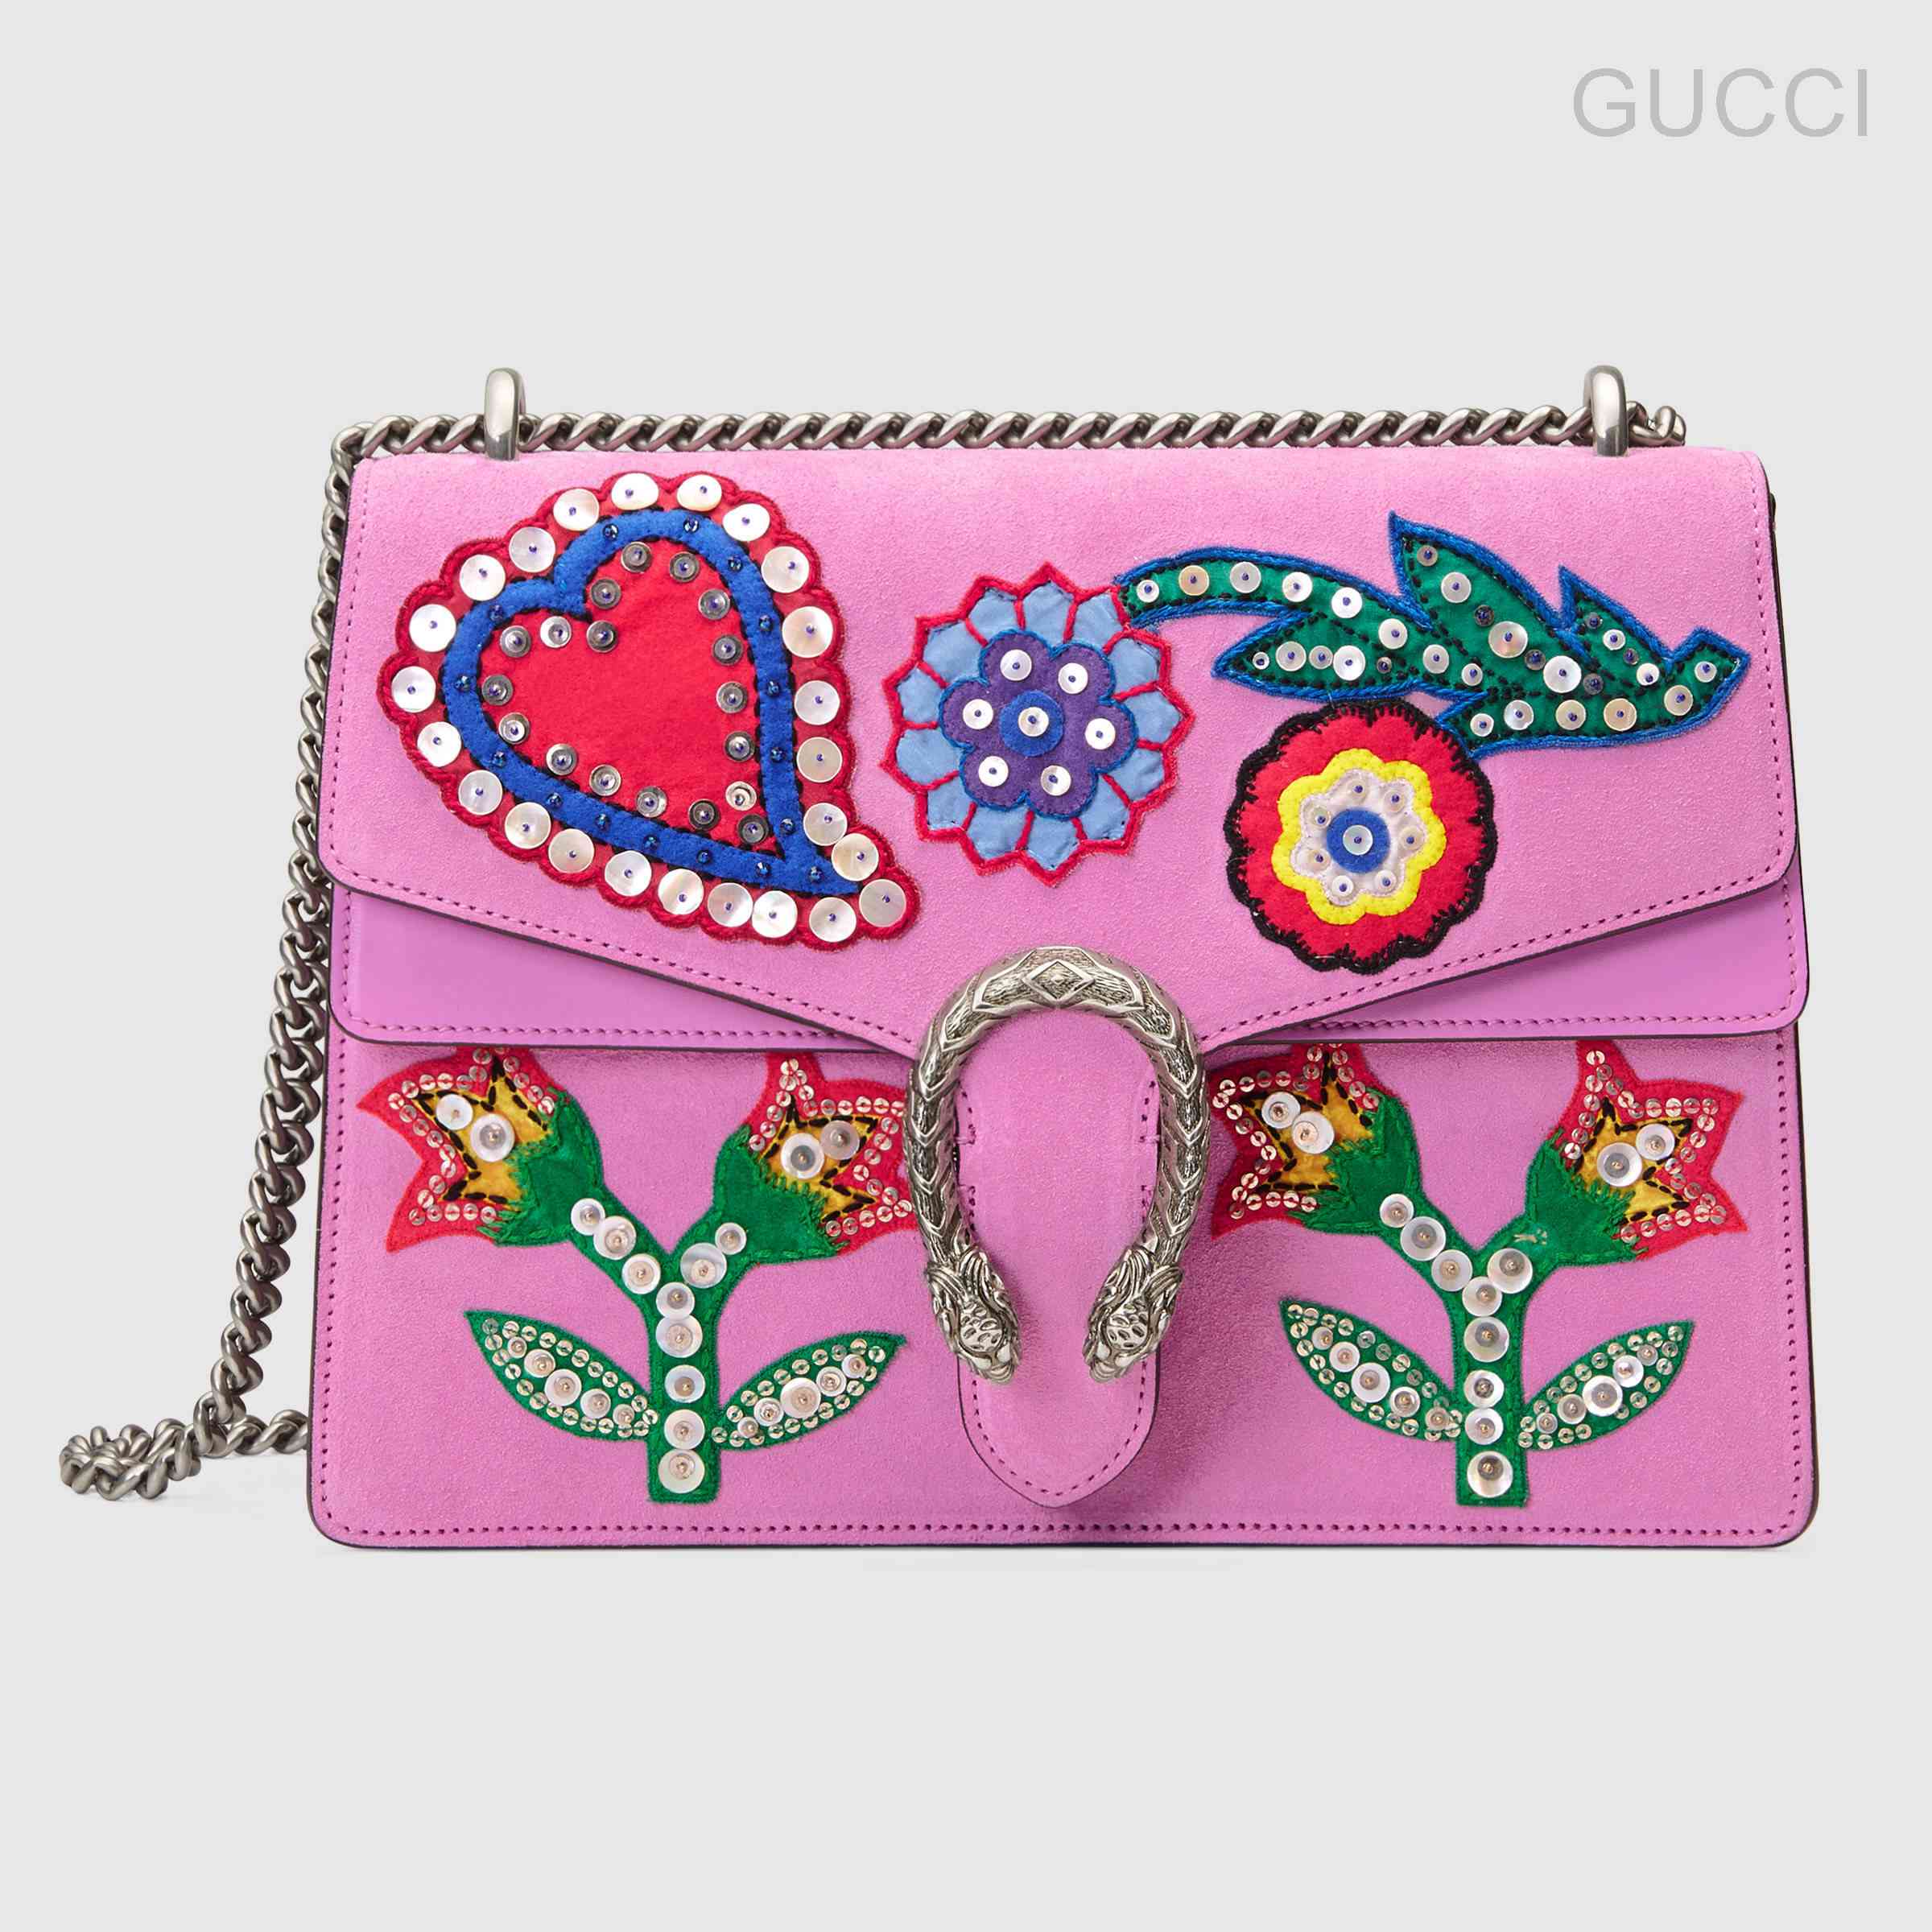 Gucci Women's Pink Dionysus Embroidered 